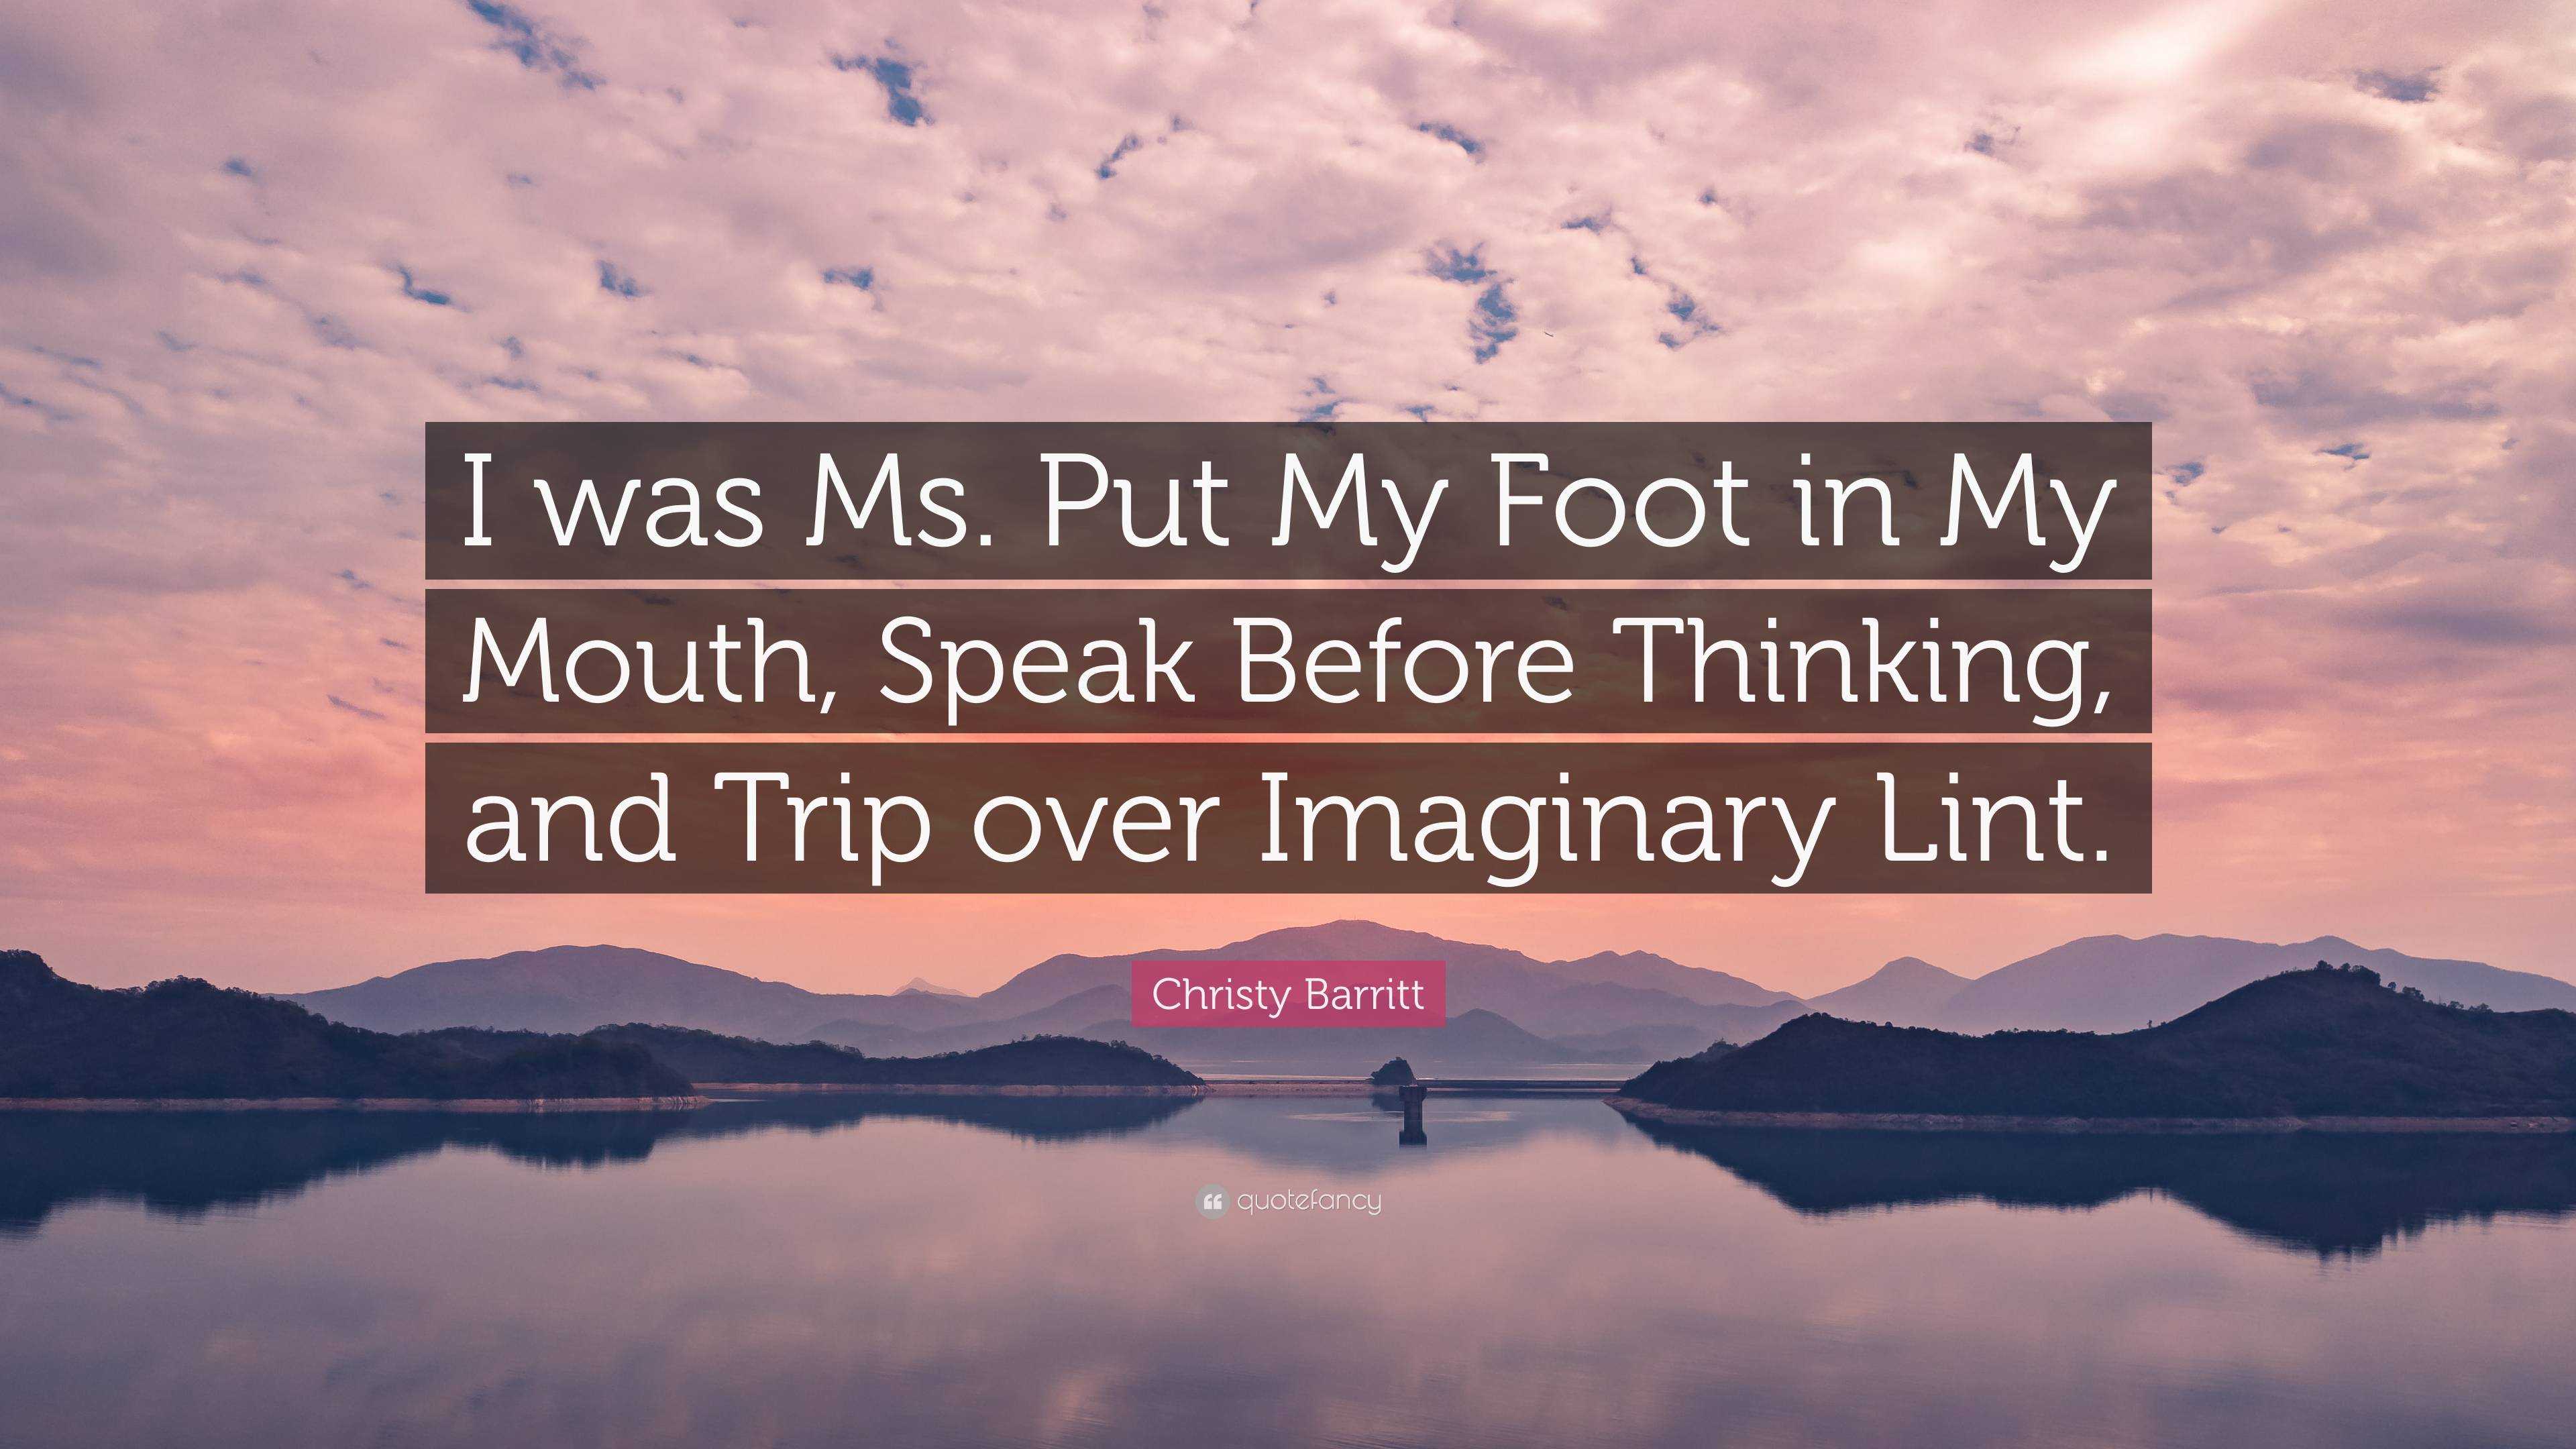 Christy Barritt Quote “i Was Ms Put My Foot In My Mouth Speak Before Thinking And Trip Over